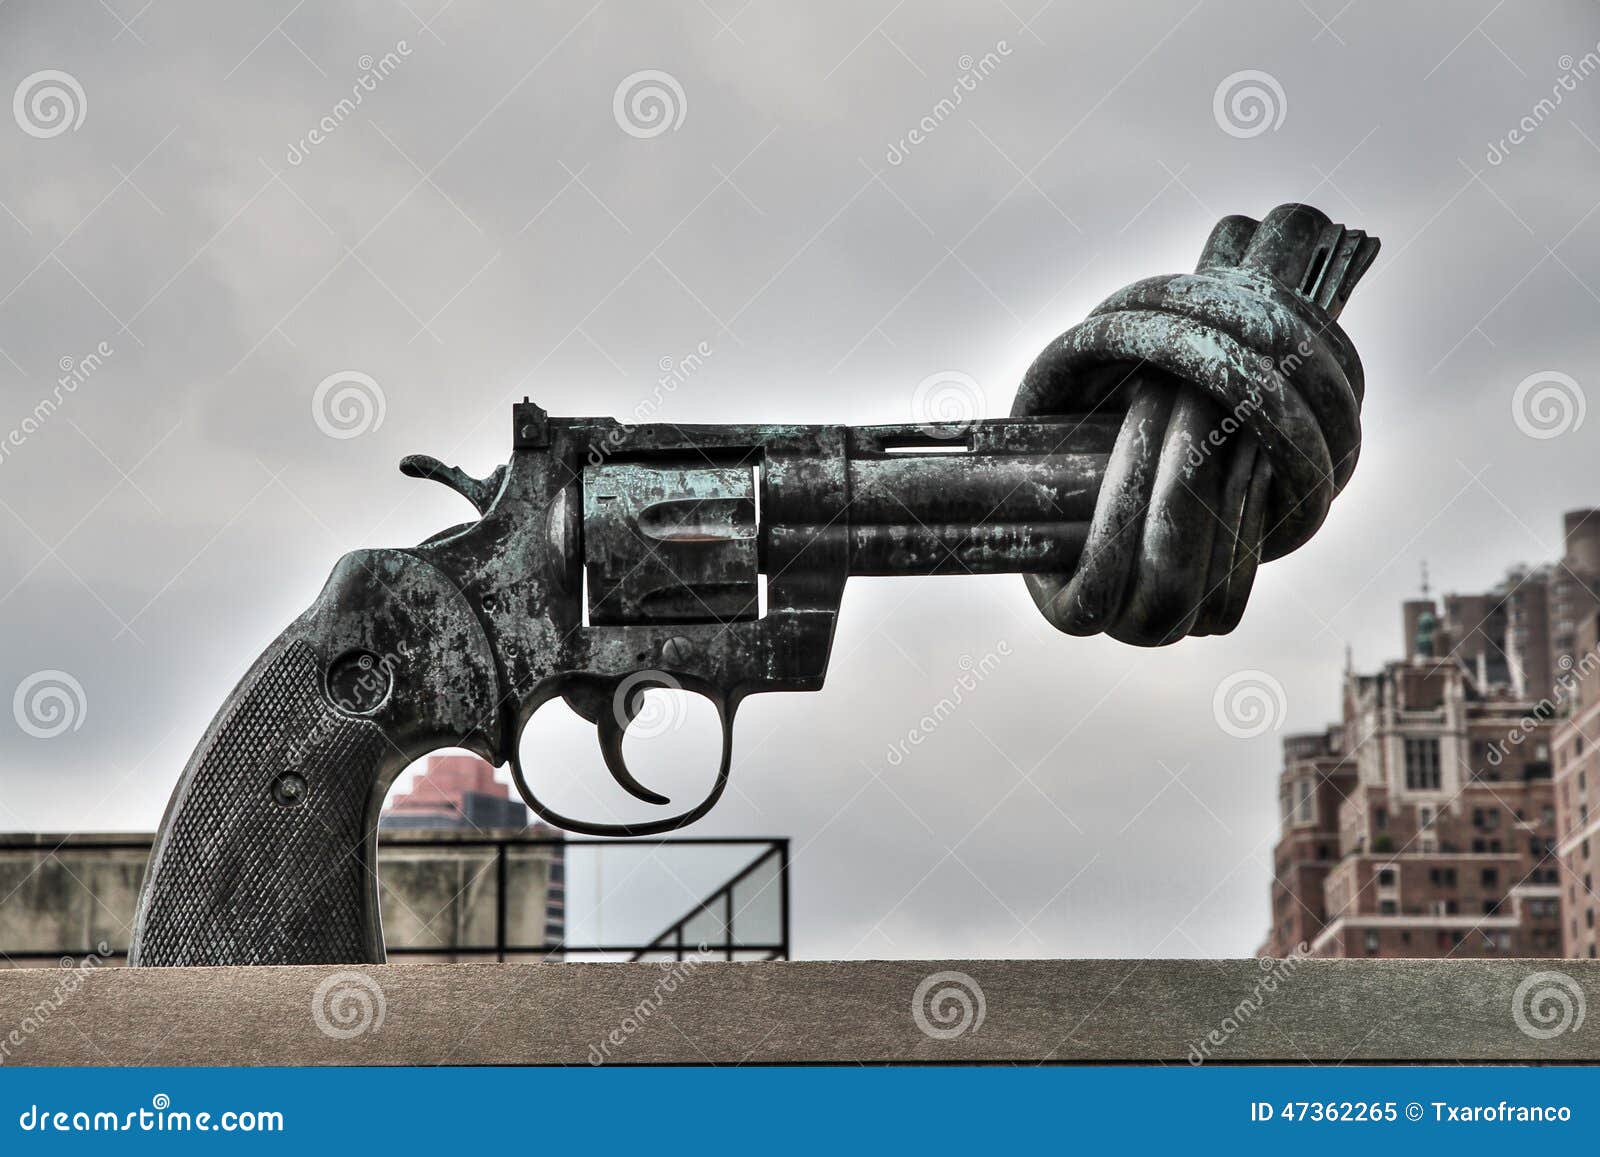 the knotted gun of united nations